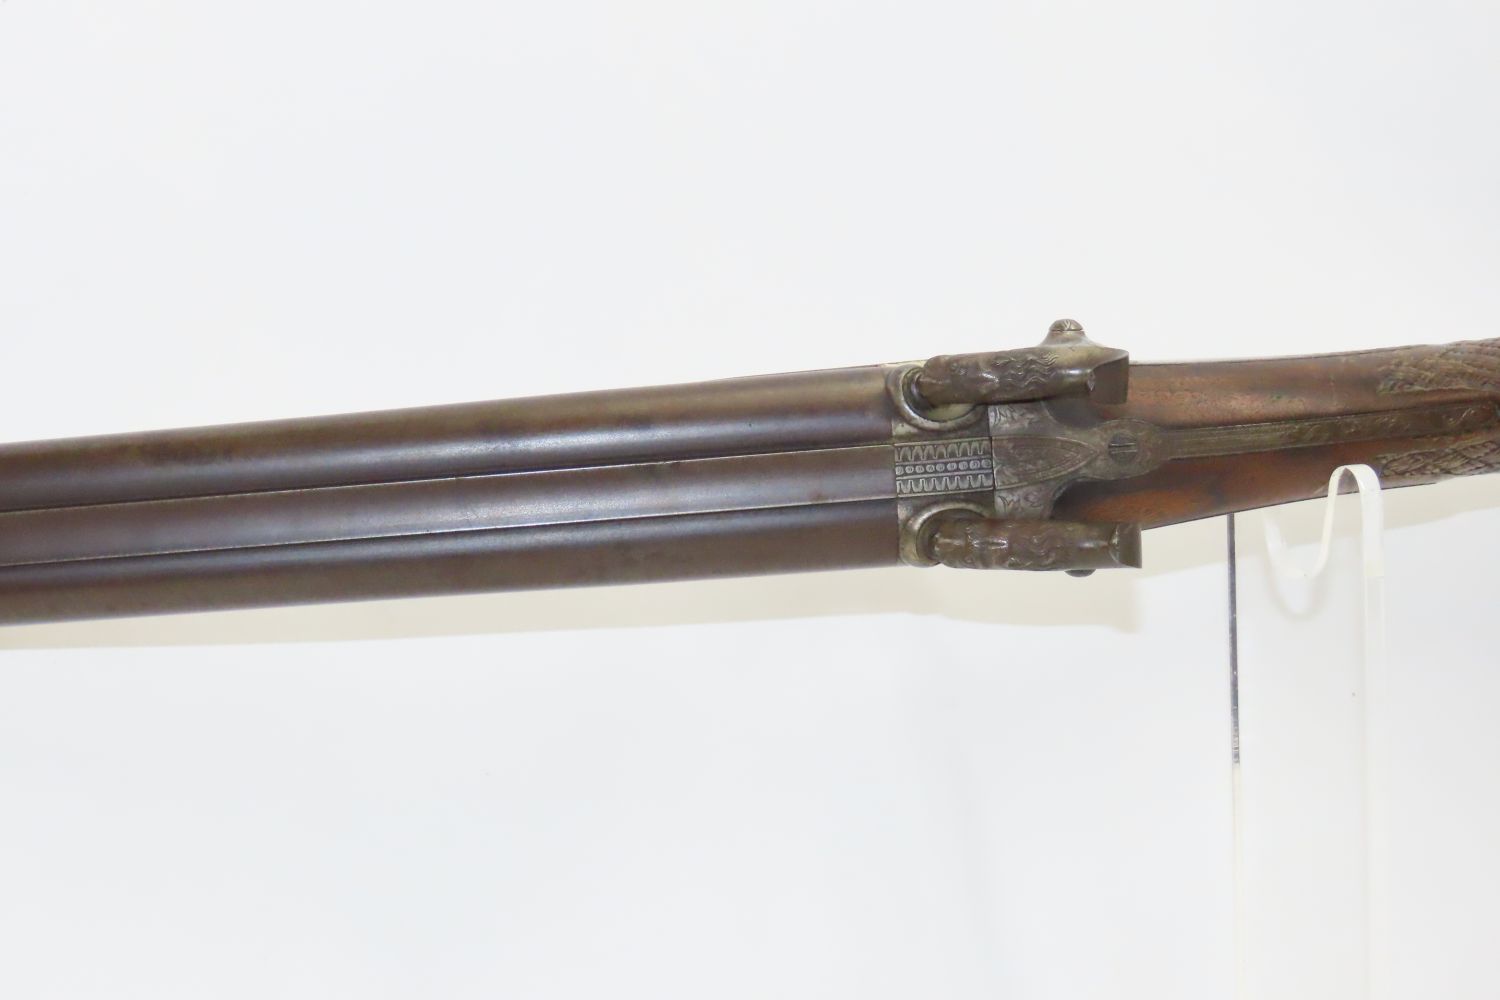 A French double-barrelled sidelock shotgun with spare barrel,Fauré Le Page  in Paris,circa 1890. Cal. 12/65,no. N 571 - A 1894. Barrel with mirror-like  bore made of Bernard Damascus,French proof mark,pearl machined midrib